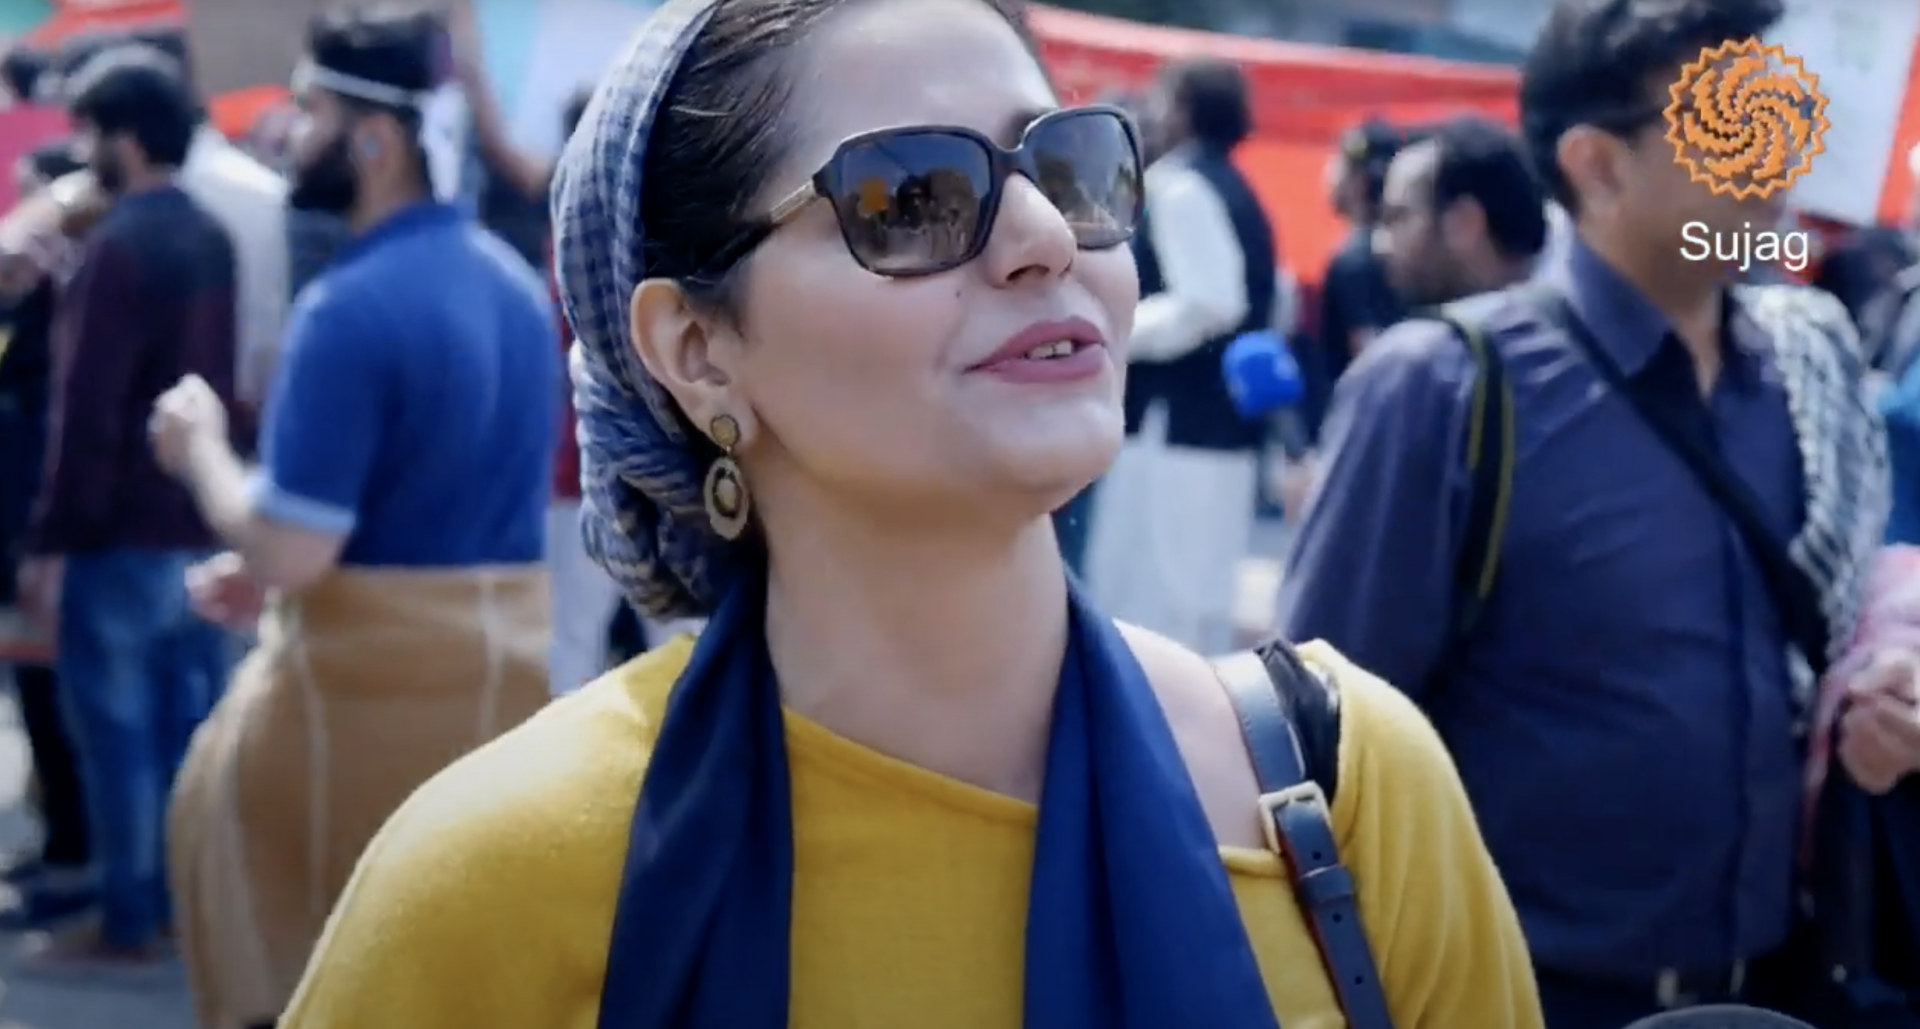 A Pakistani woman in sunglasses at the Aurat women's march